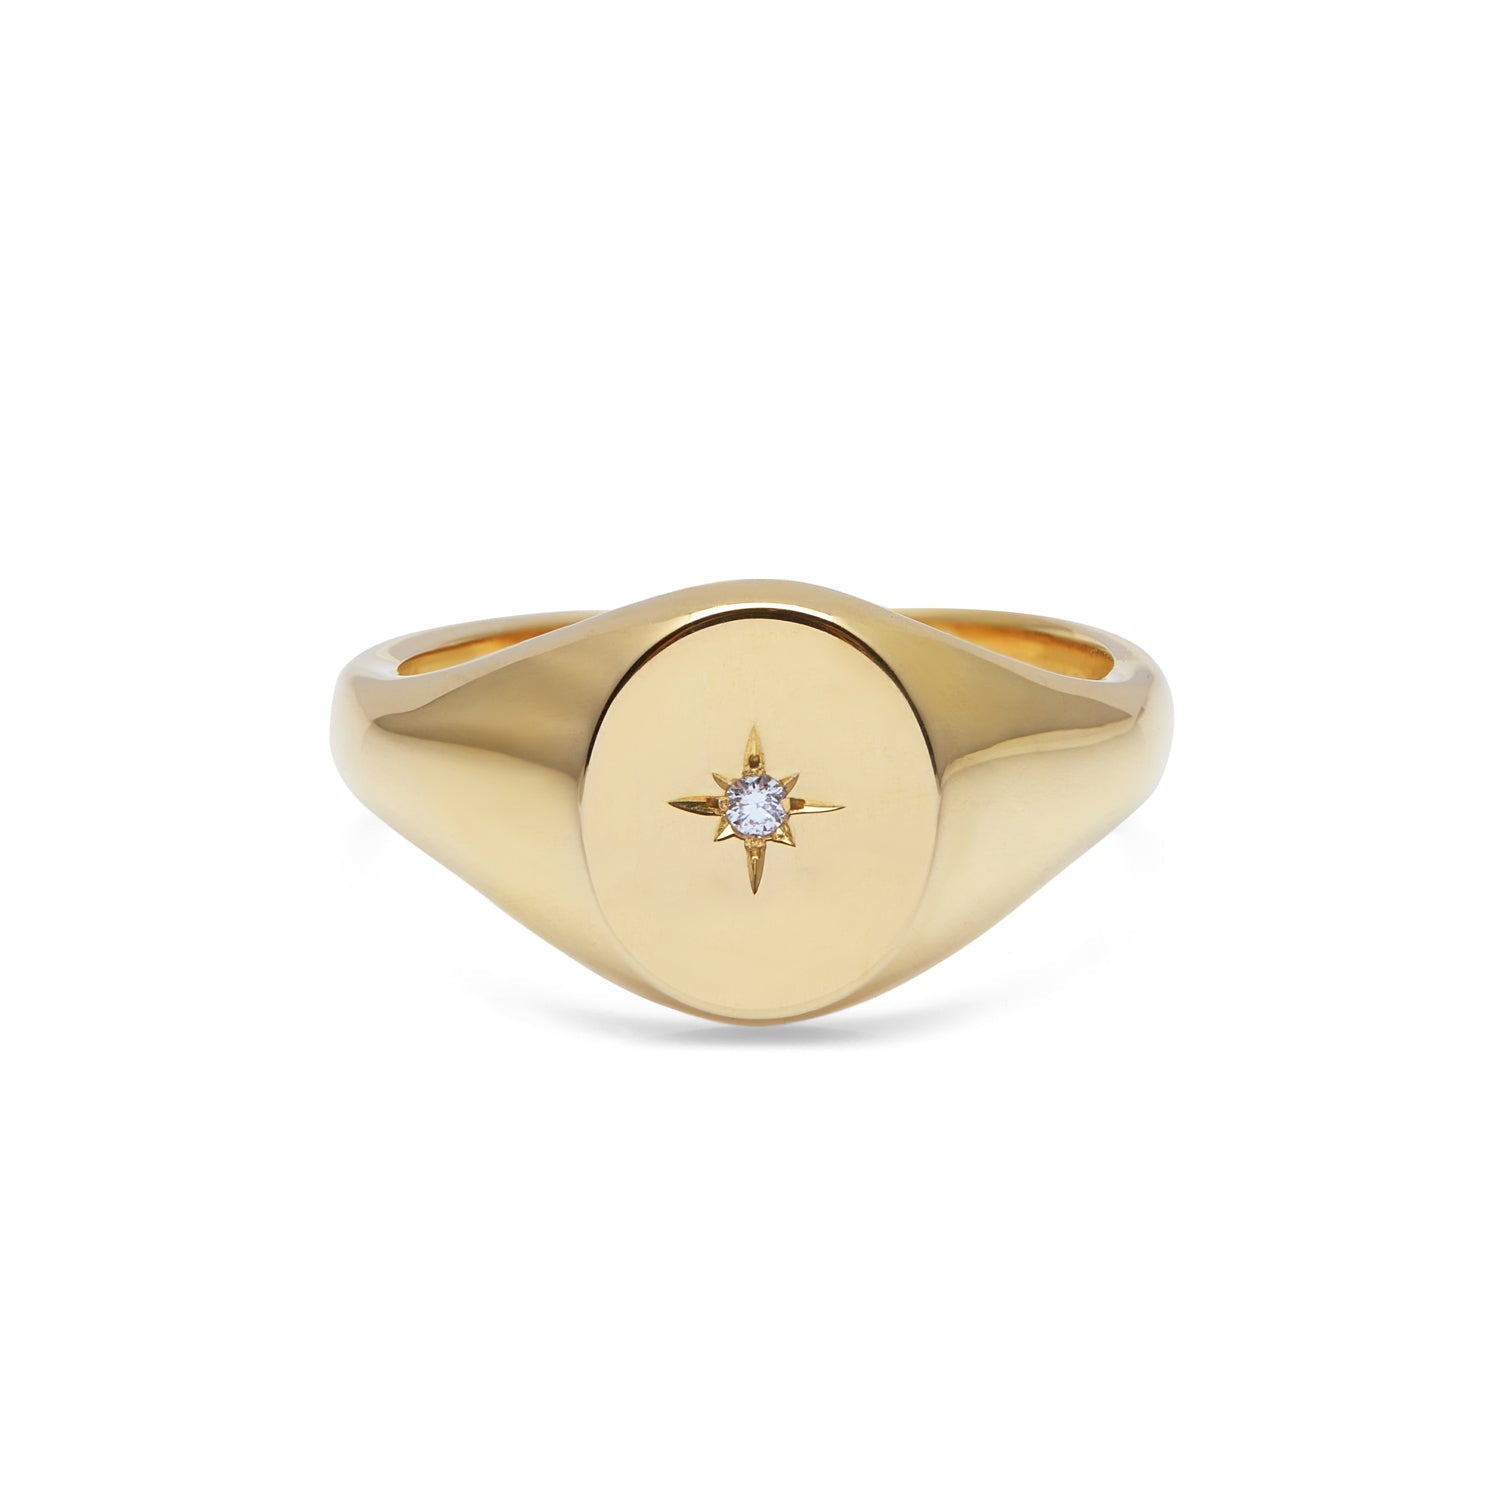 Oval Signet Ring with Star Set Diamond 11x9 - 18K Yellow Gold